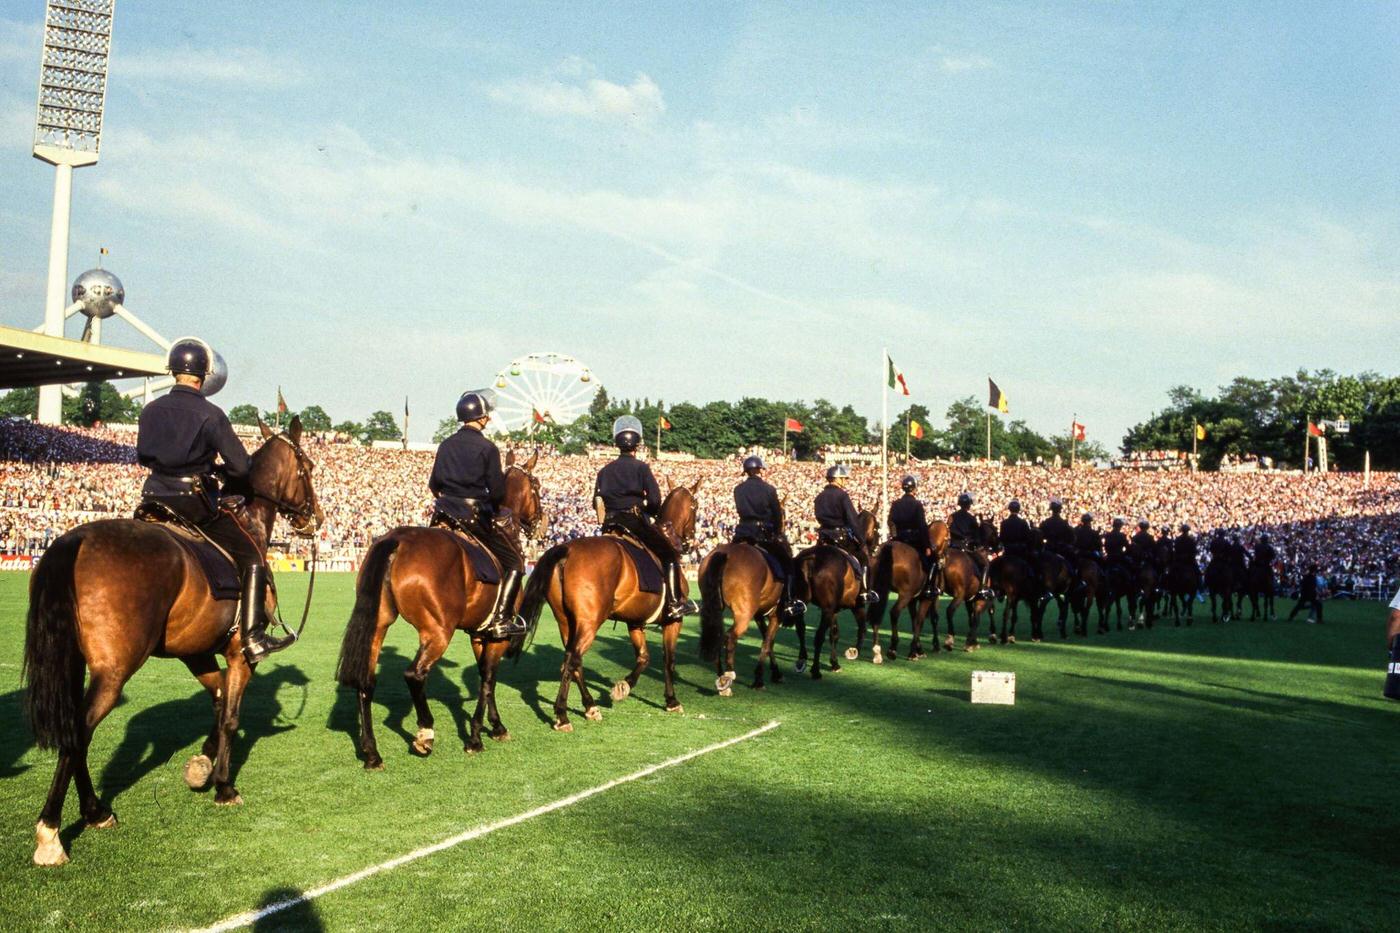 Mounted police patrol pitch side during European Cup Final at Heysel Stadium, 1985.